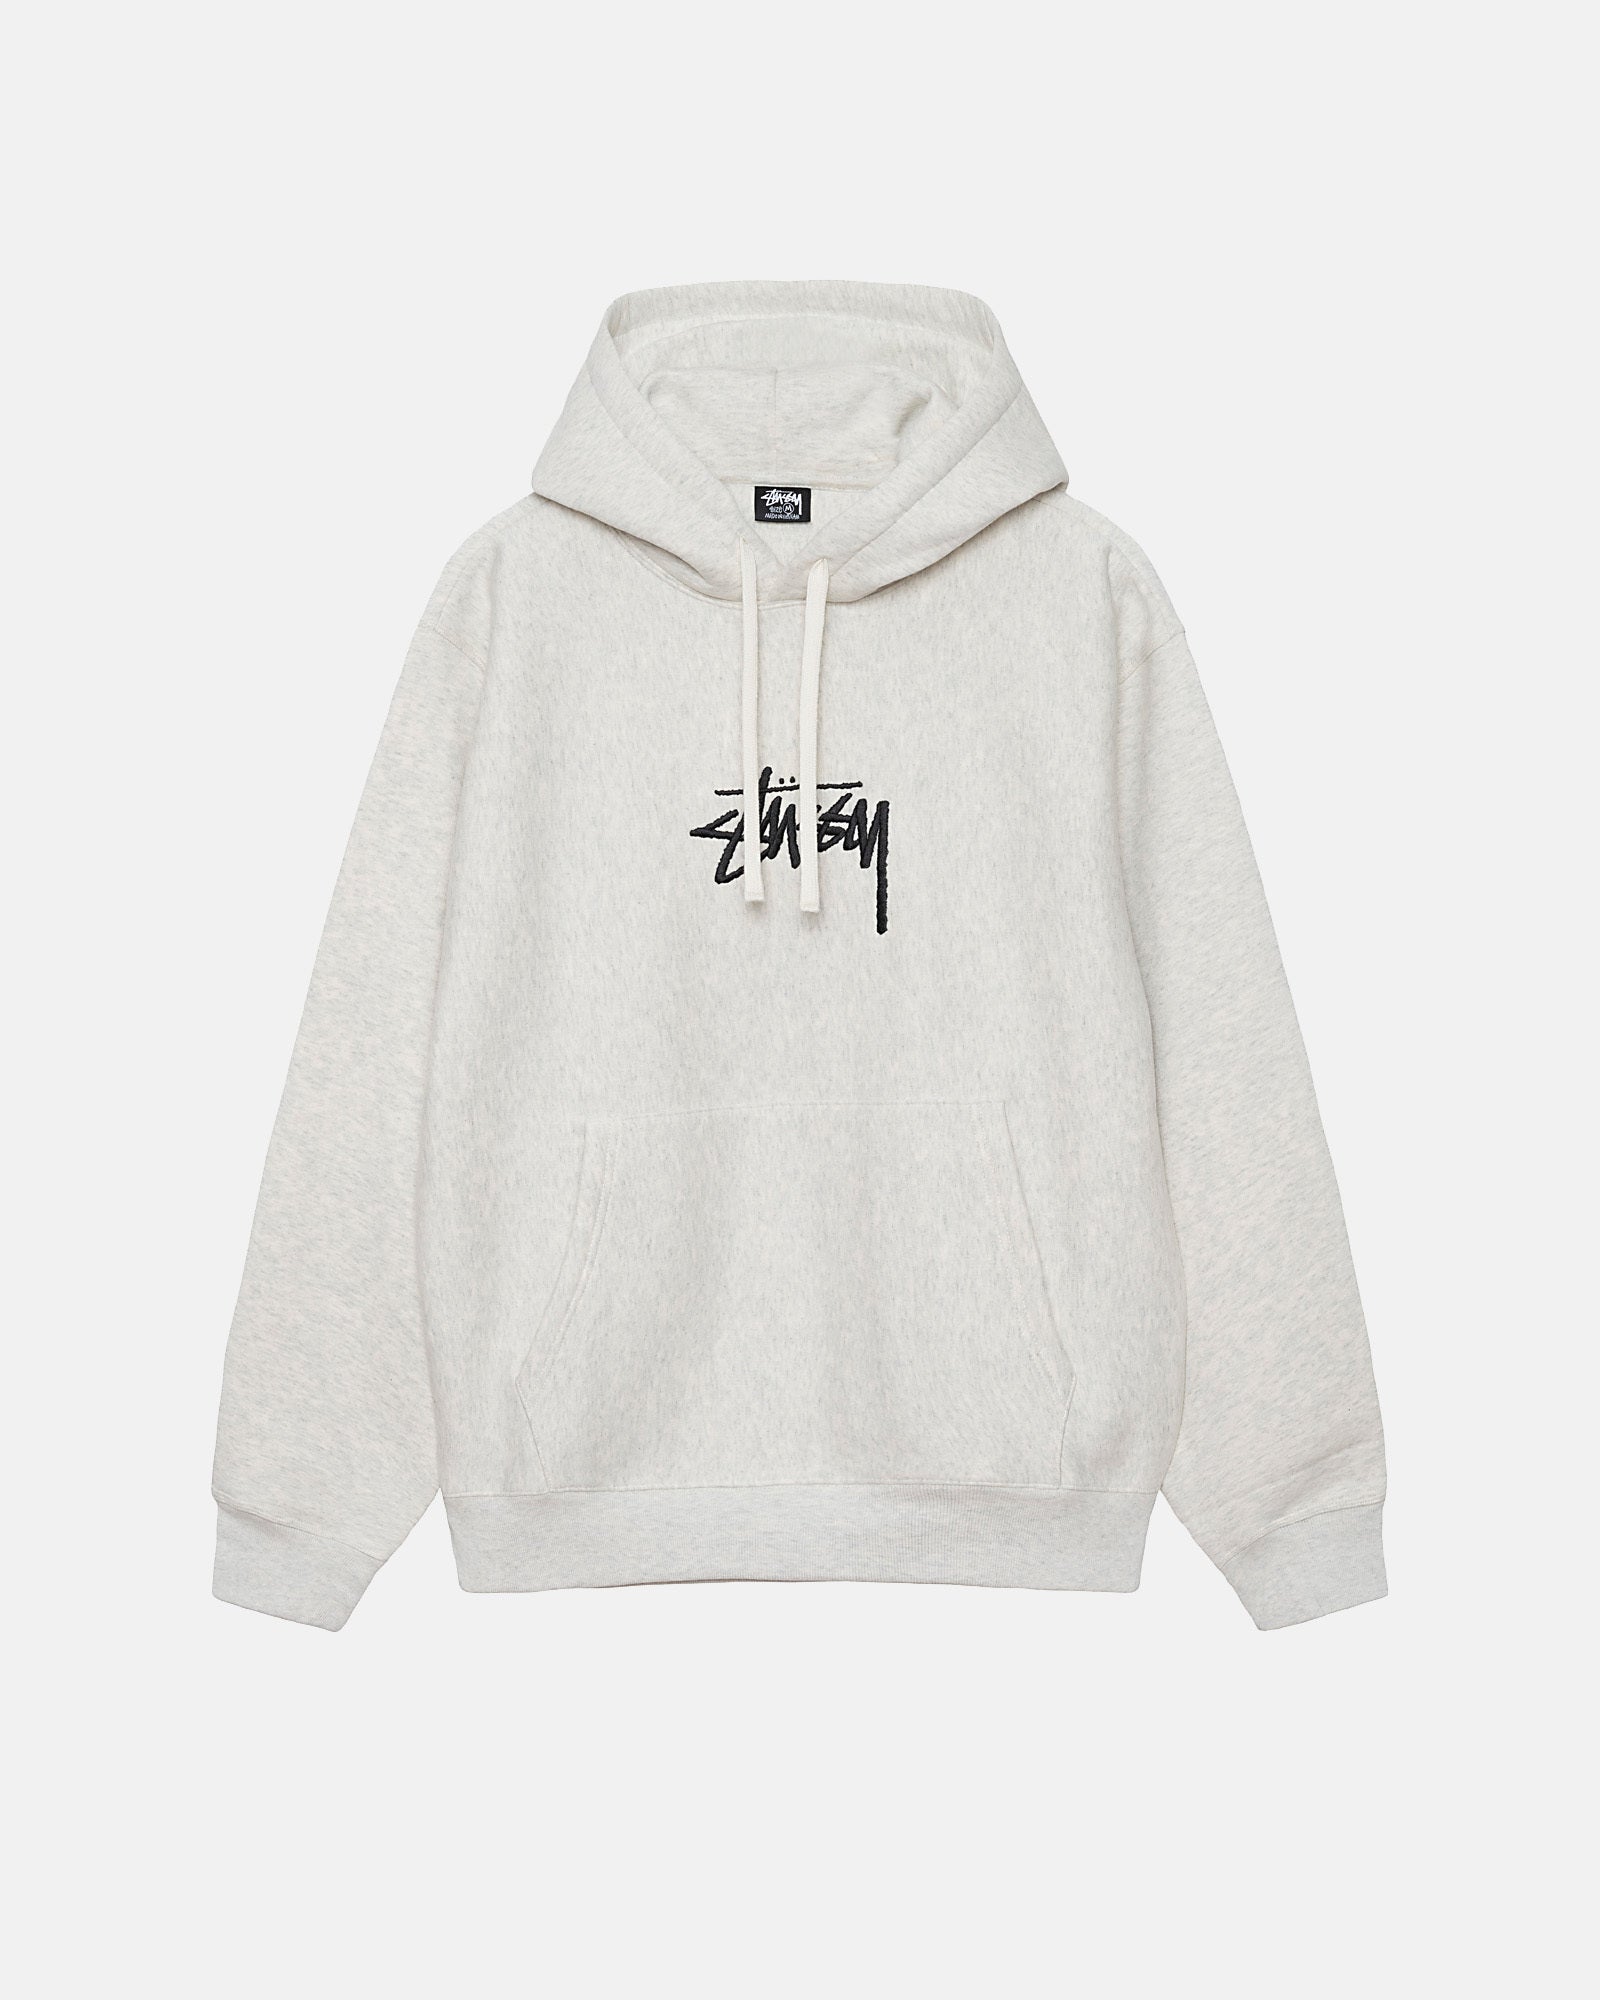 SHOP ALL** DO NOT DELETE / USED FOR SWATCHES – Stüssy Japan